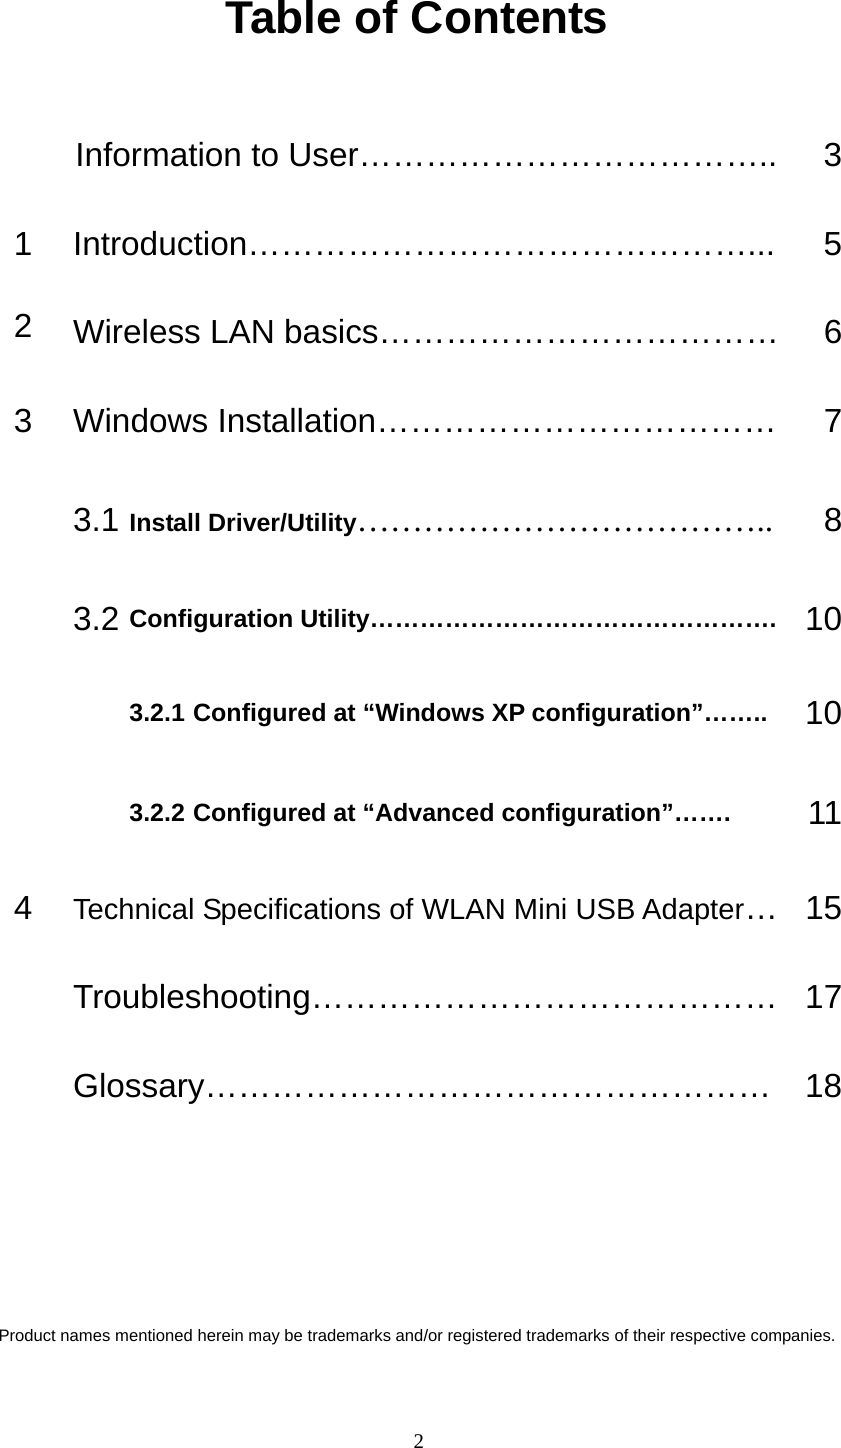 Table of Contents  Information to User………………………………..  31 Introduction………………………………………...  52  Wireless LAN basics………………………………    63  Windows Installation………………………………  7 3.1 Install Driver/Utility……………………………….. 8 3.2 Configuration Utility………………………………………….  103.2.1 Configured at “Windows XP configuration”……..  10  3.2.2 Configured at “Advanced configuration”…….  114  Technical Specifications of WLAN Mini USB Adapter… 15 Troubleshooting…………………………………… 17 Glossary…………………………………………… 18     Product names mentioned herein may be trademarks and/or registered trademarks of their respective companies.   2 